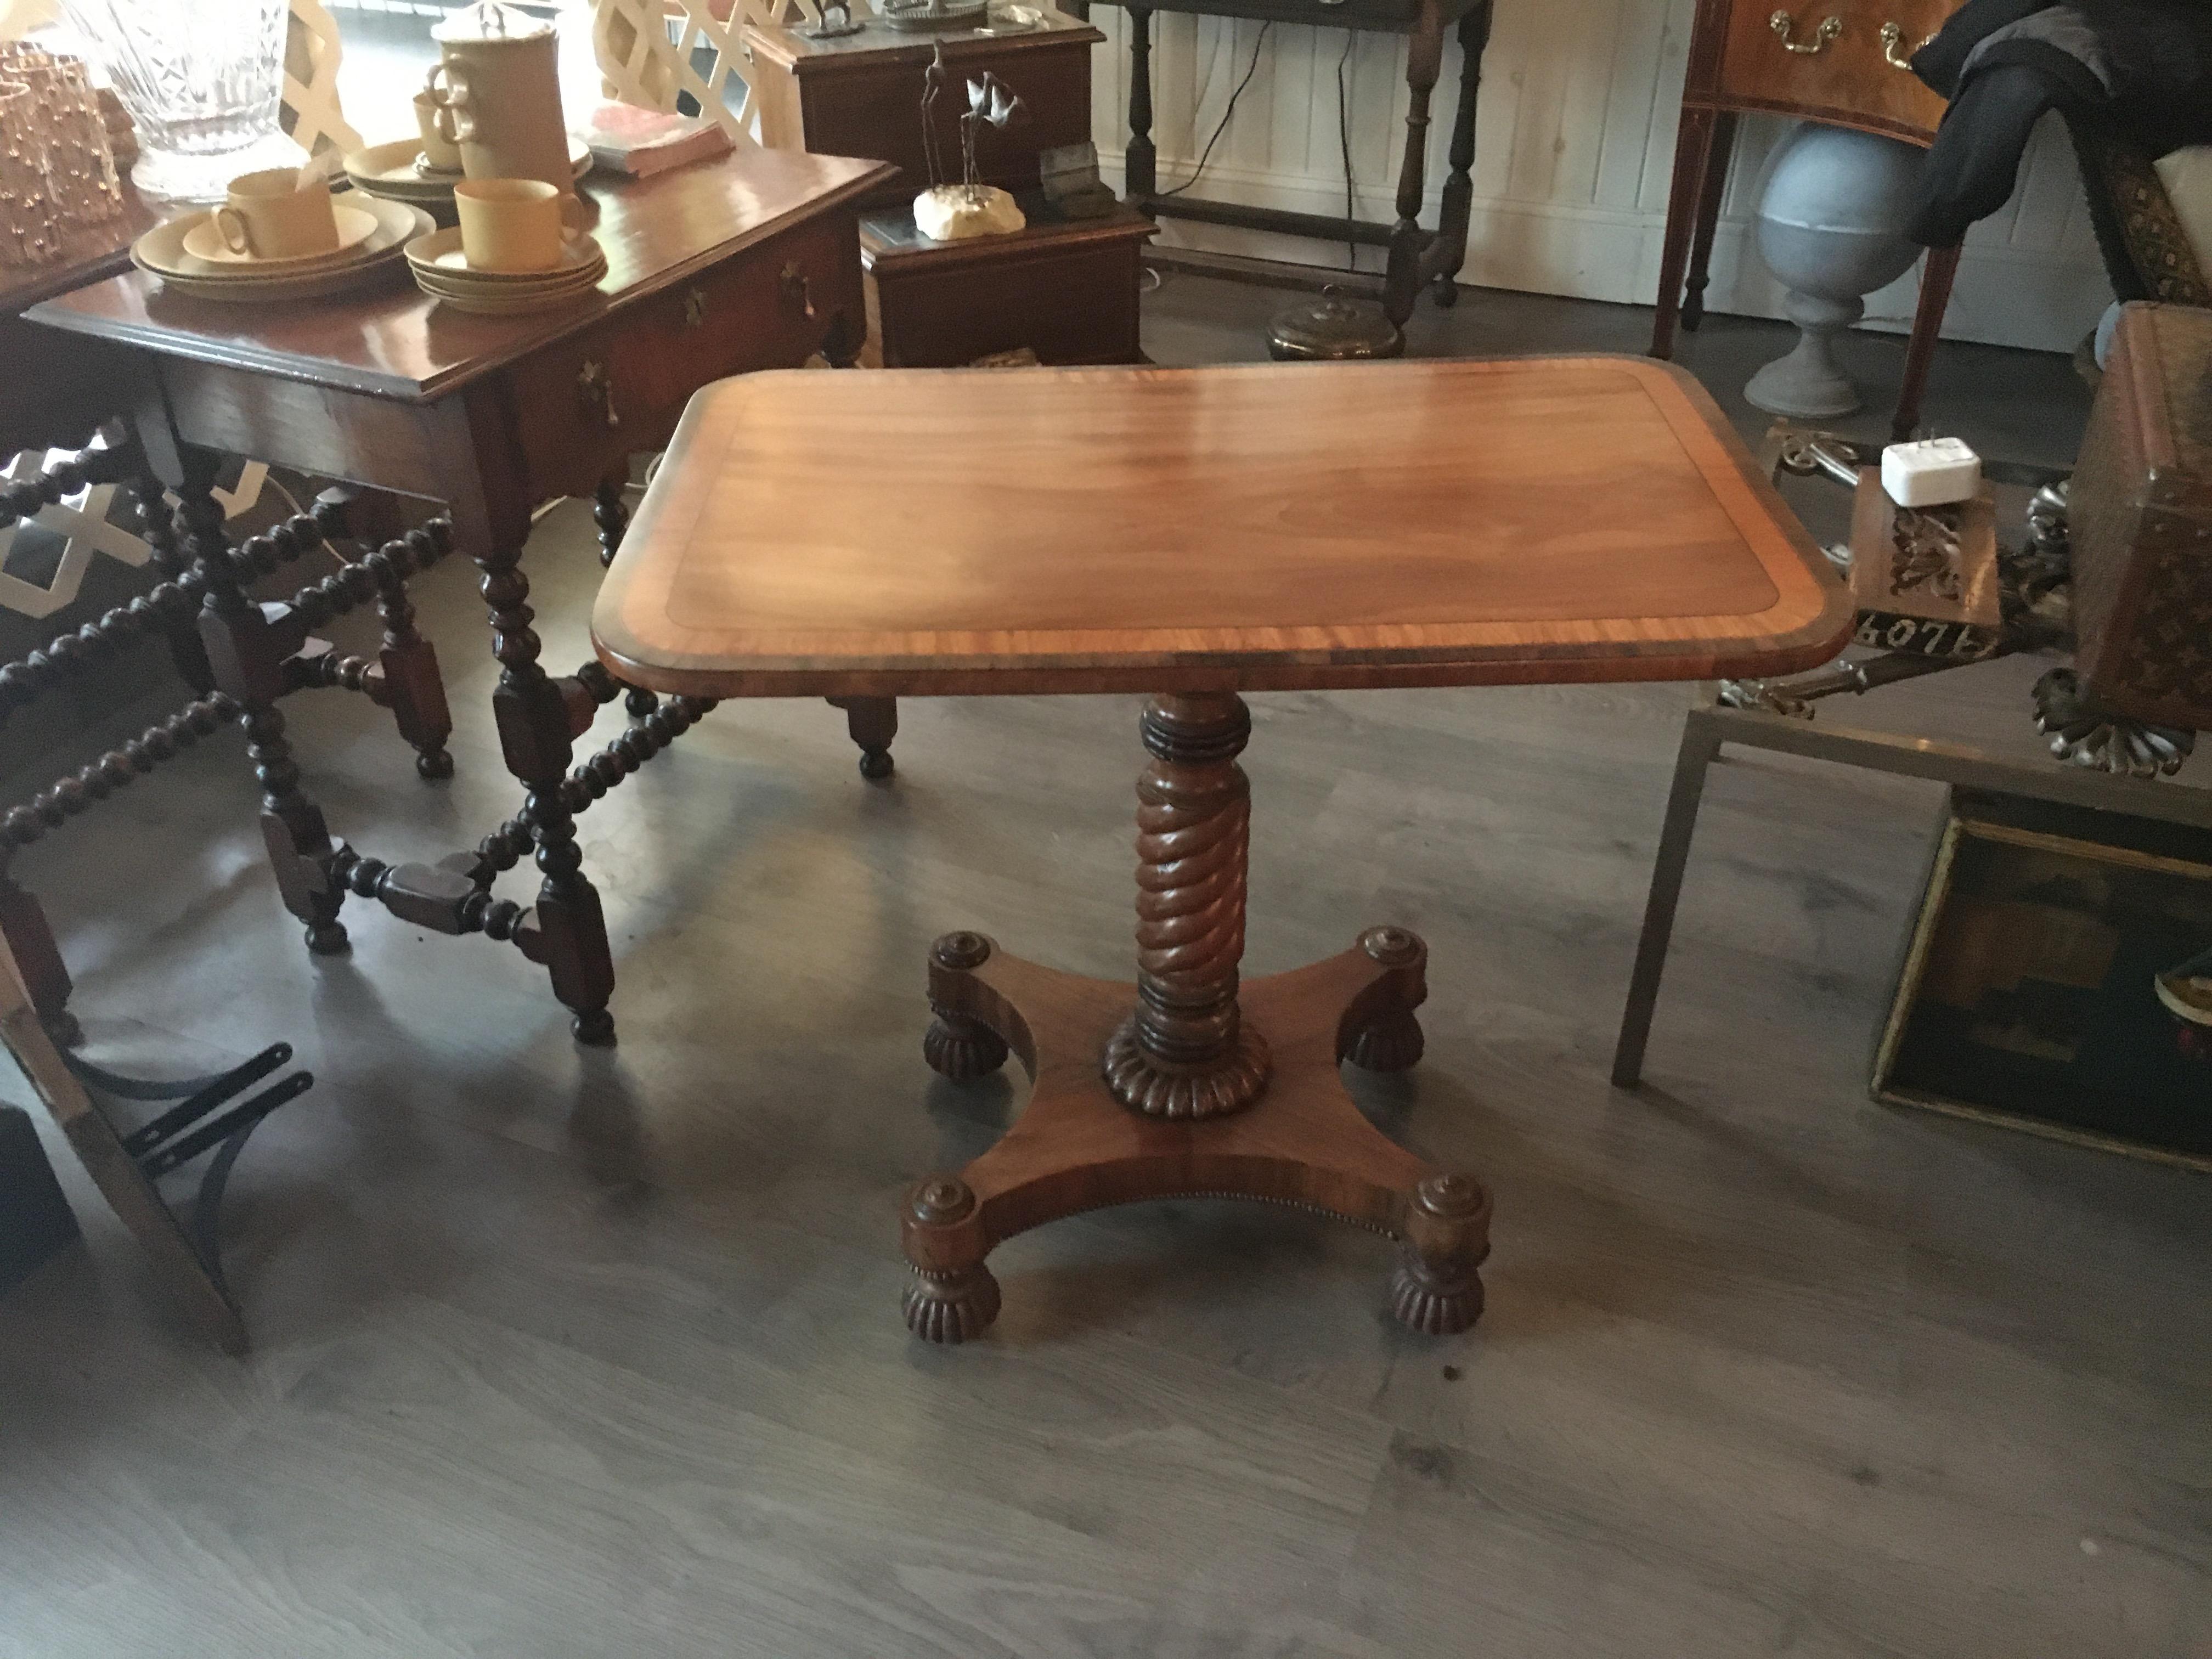 Early 19th century Regency mahogany table with rosewood banding, great color and patina.